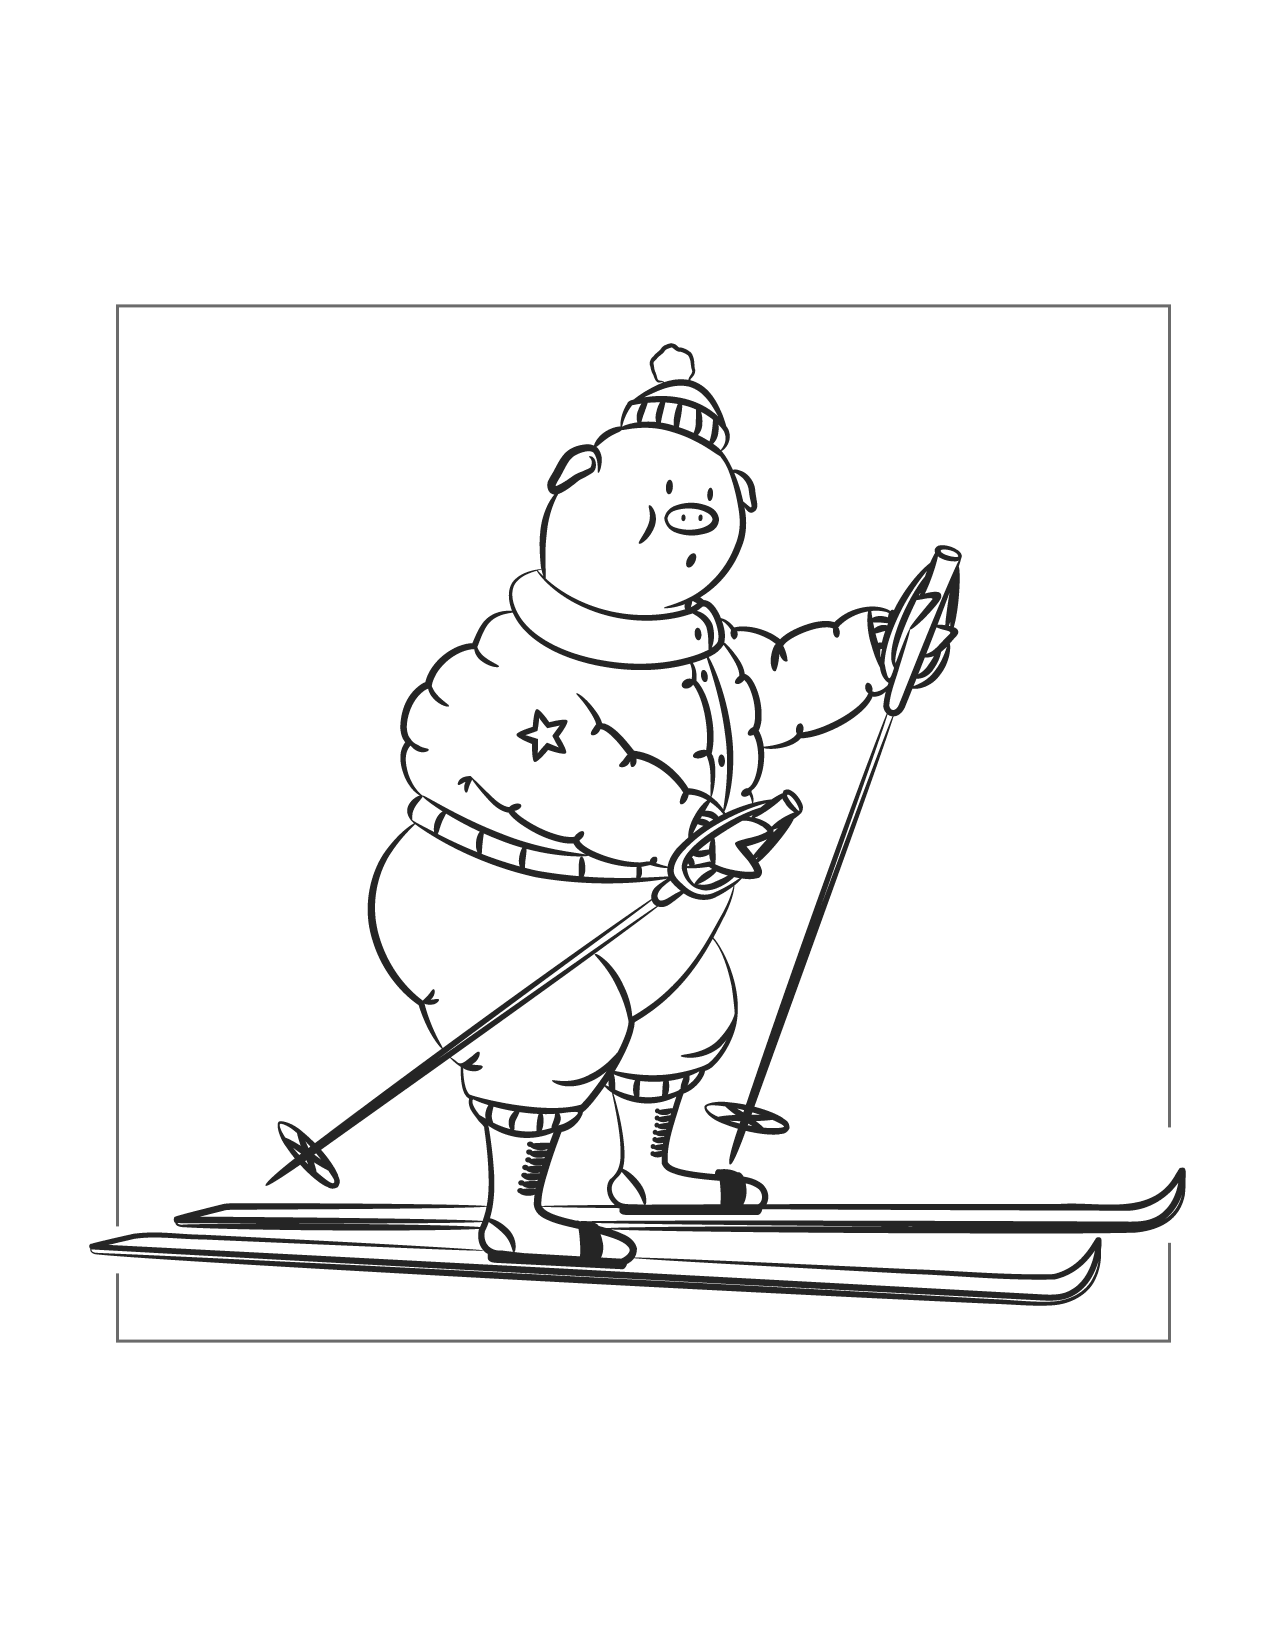 Skiing Pig Coloring Page